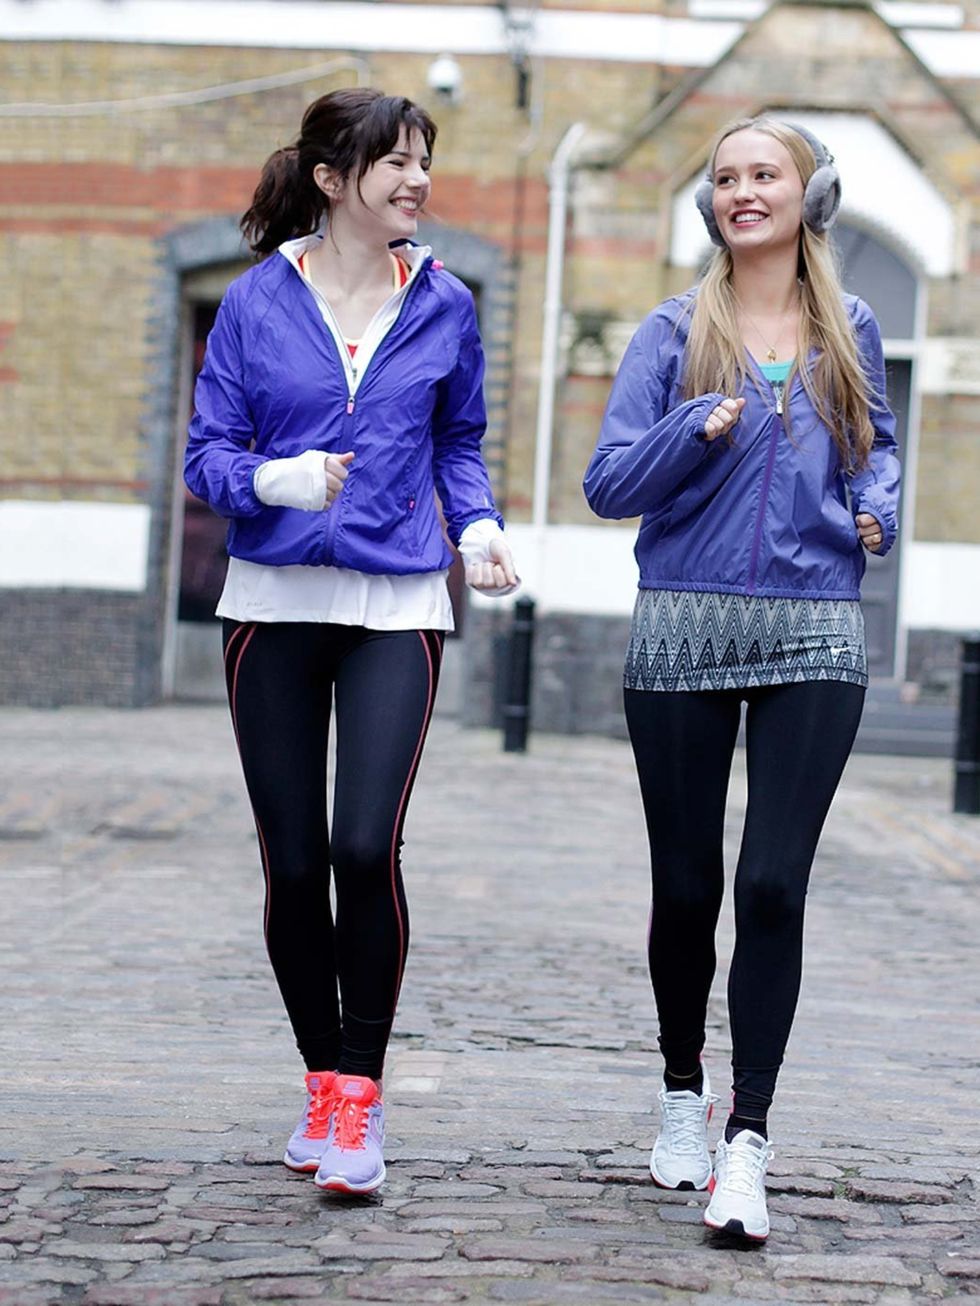 <p><em>Georgia Simmonds, Features Assistant, and Joely Walker, Beauty Assistant. </em></p><p>Georgia (pictured left): <a href="http://store.nike.com/gb/en_gb/">Nike</a> Top and Trainers, <a href="http://www.sweatybetty.com/">Sweaty Betty</a> Leggings and 